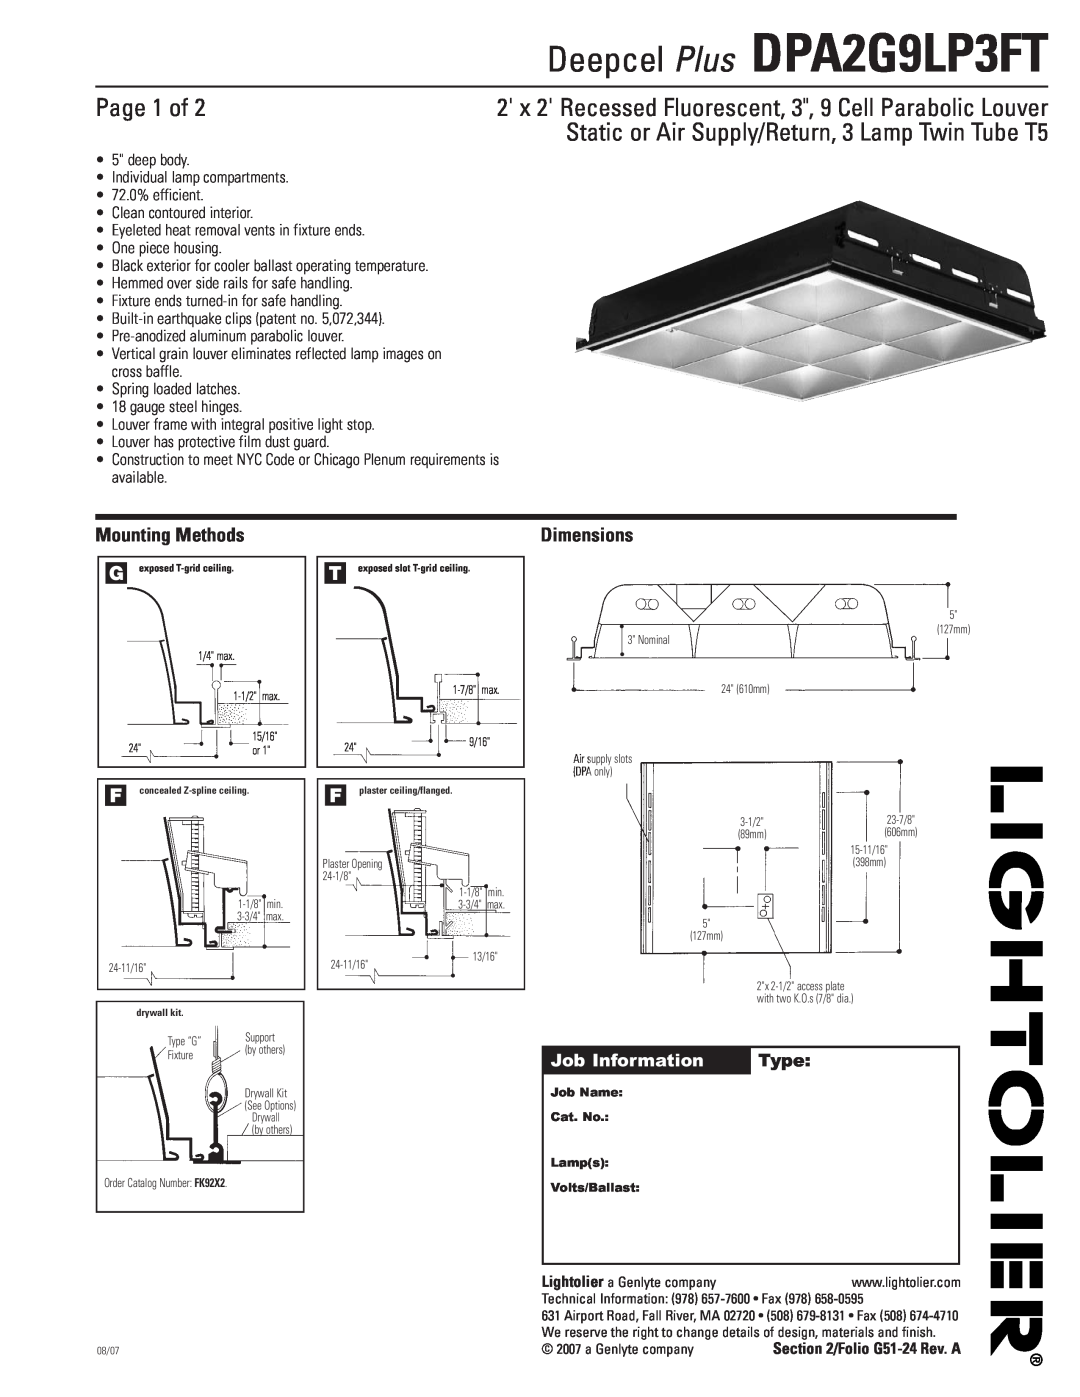 Lightolier DPA2G9LP3FT dimensions Page 1 of, Static or Air Supply/Return, 3 Lamp Twin Tube T5, Mounting Methods, Type 